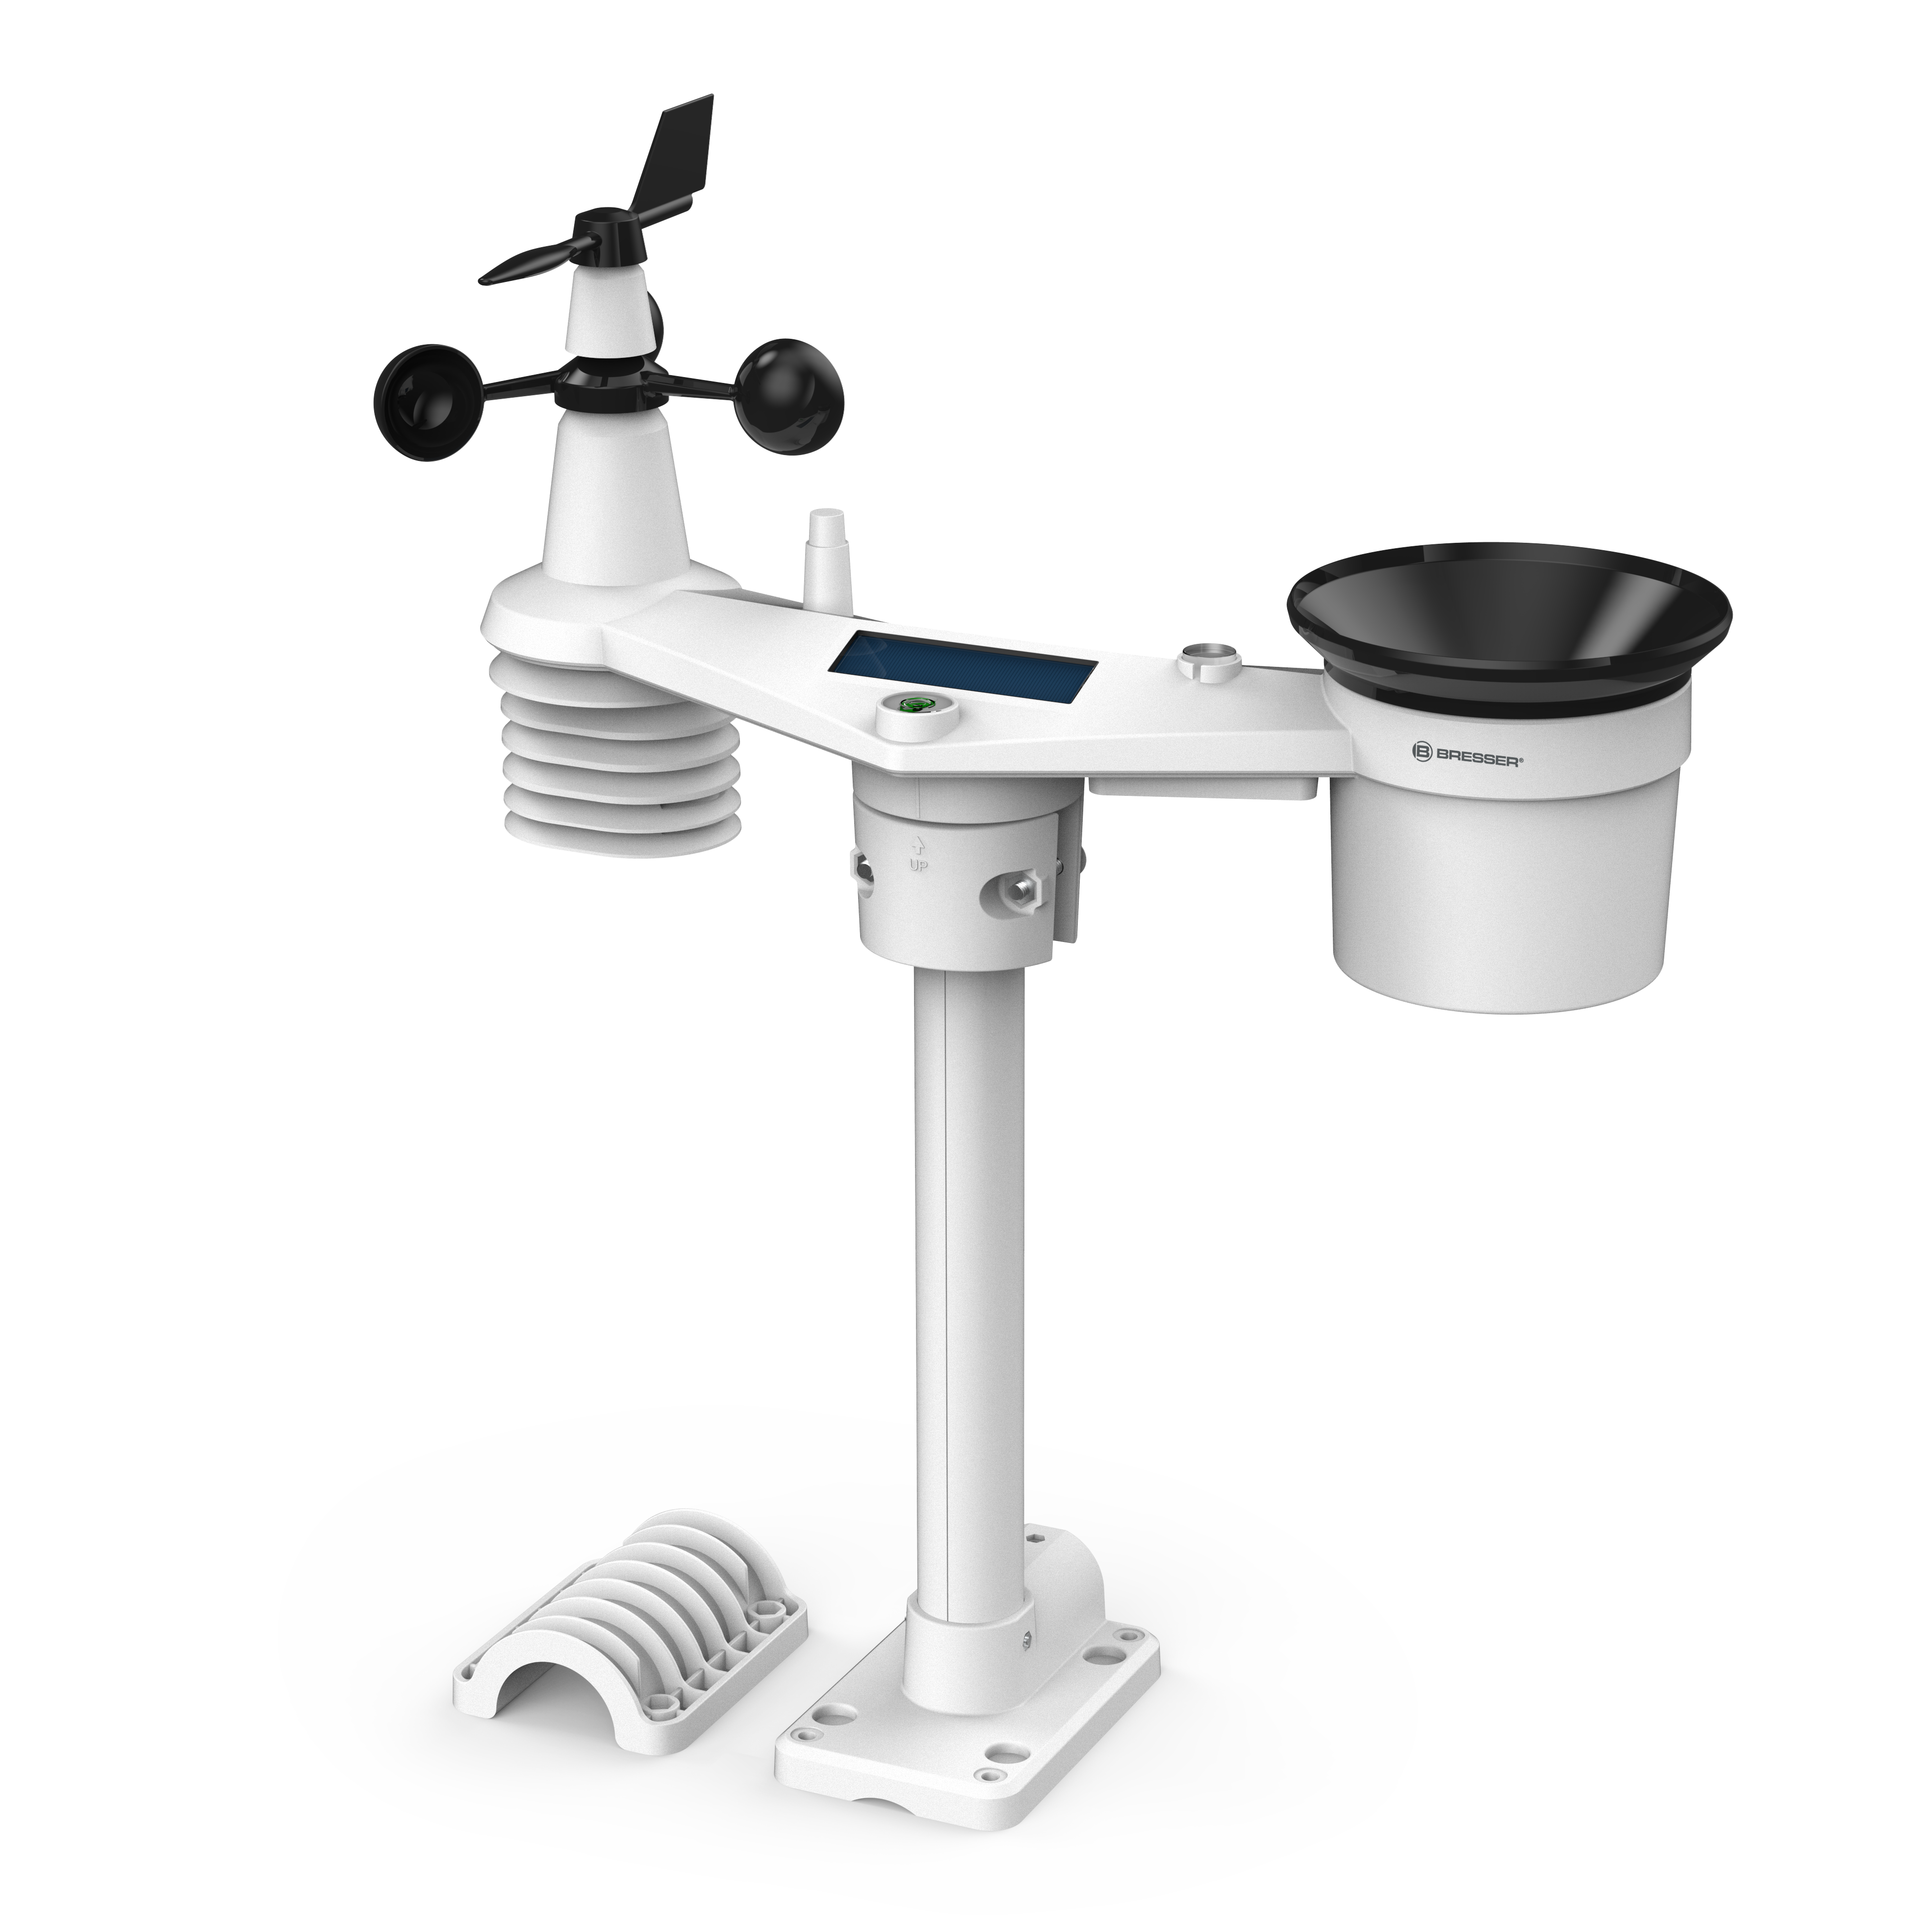 BRESSER 7-in-1 Outdoor Sensor for 7003200 4-Day 4CAST Wi-Fi Weather Station